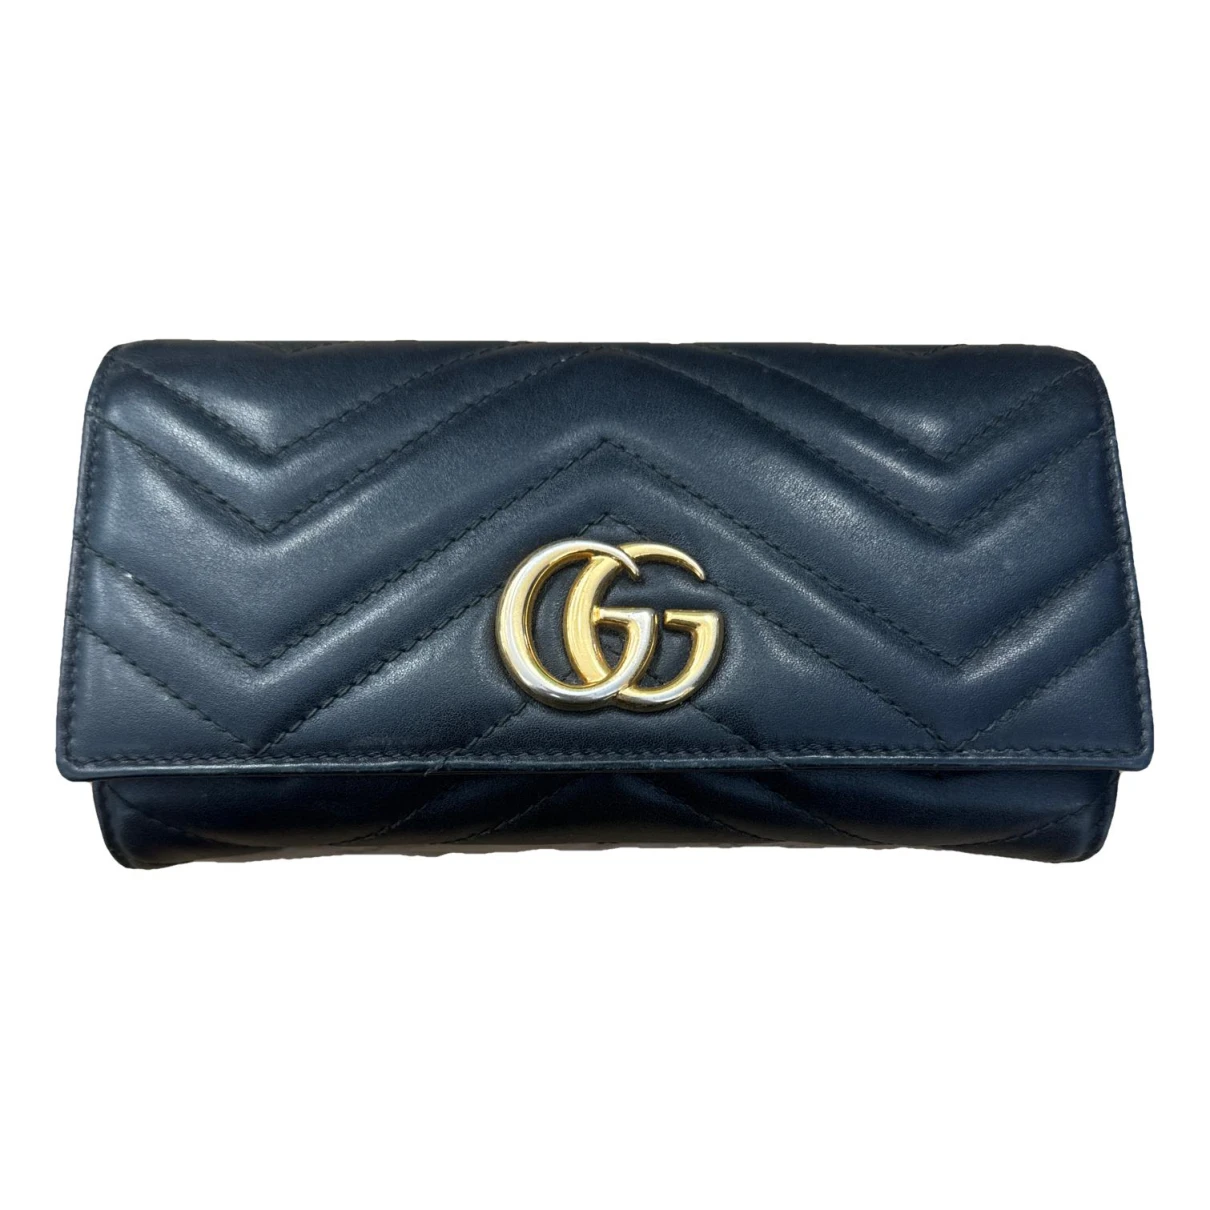 Pre-owned Gucci Marmont Leather Purse In Black